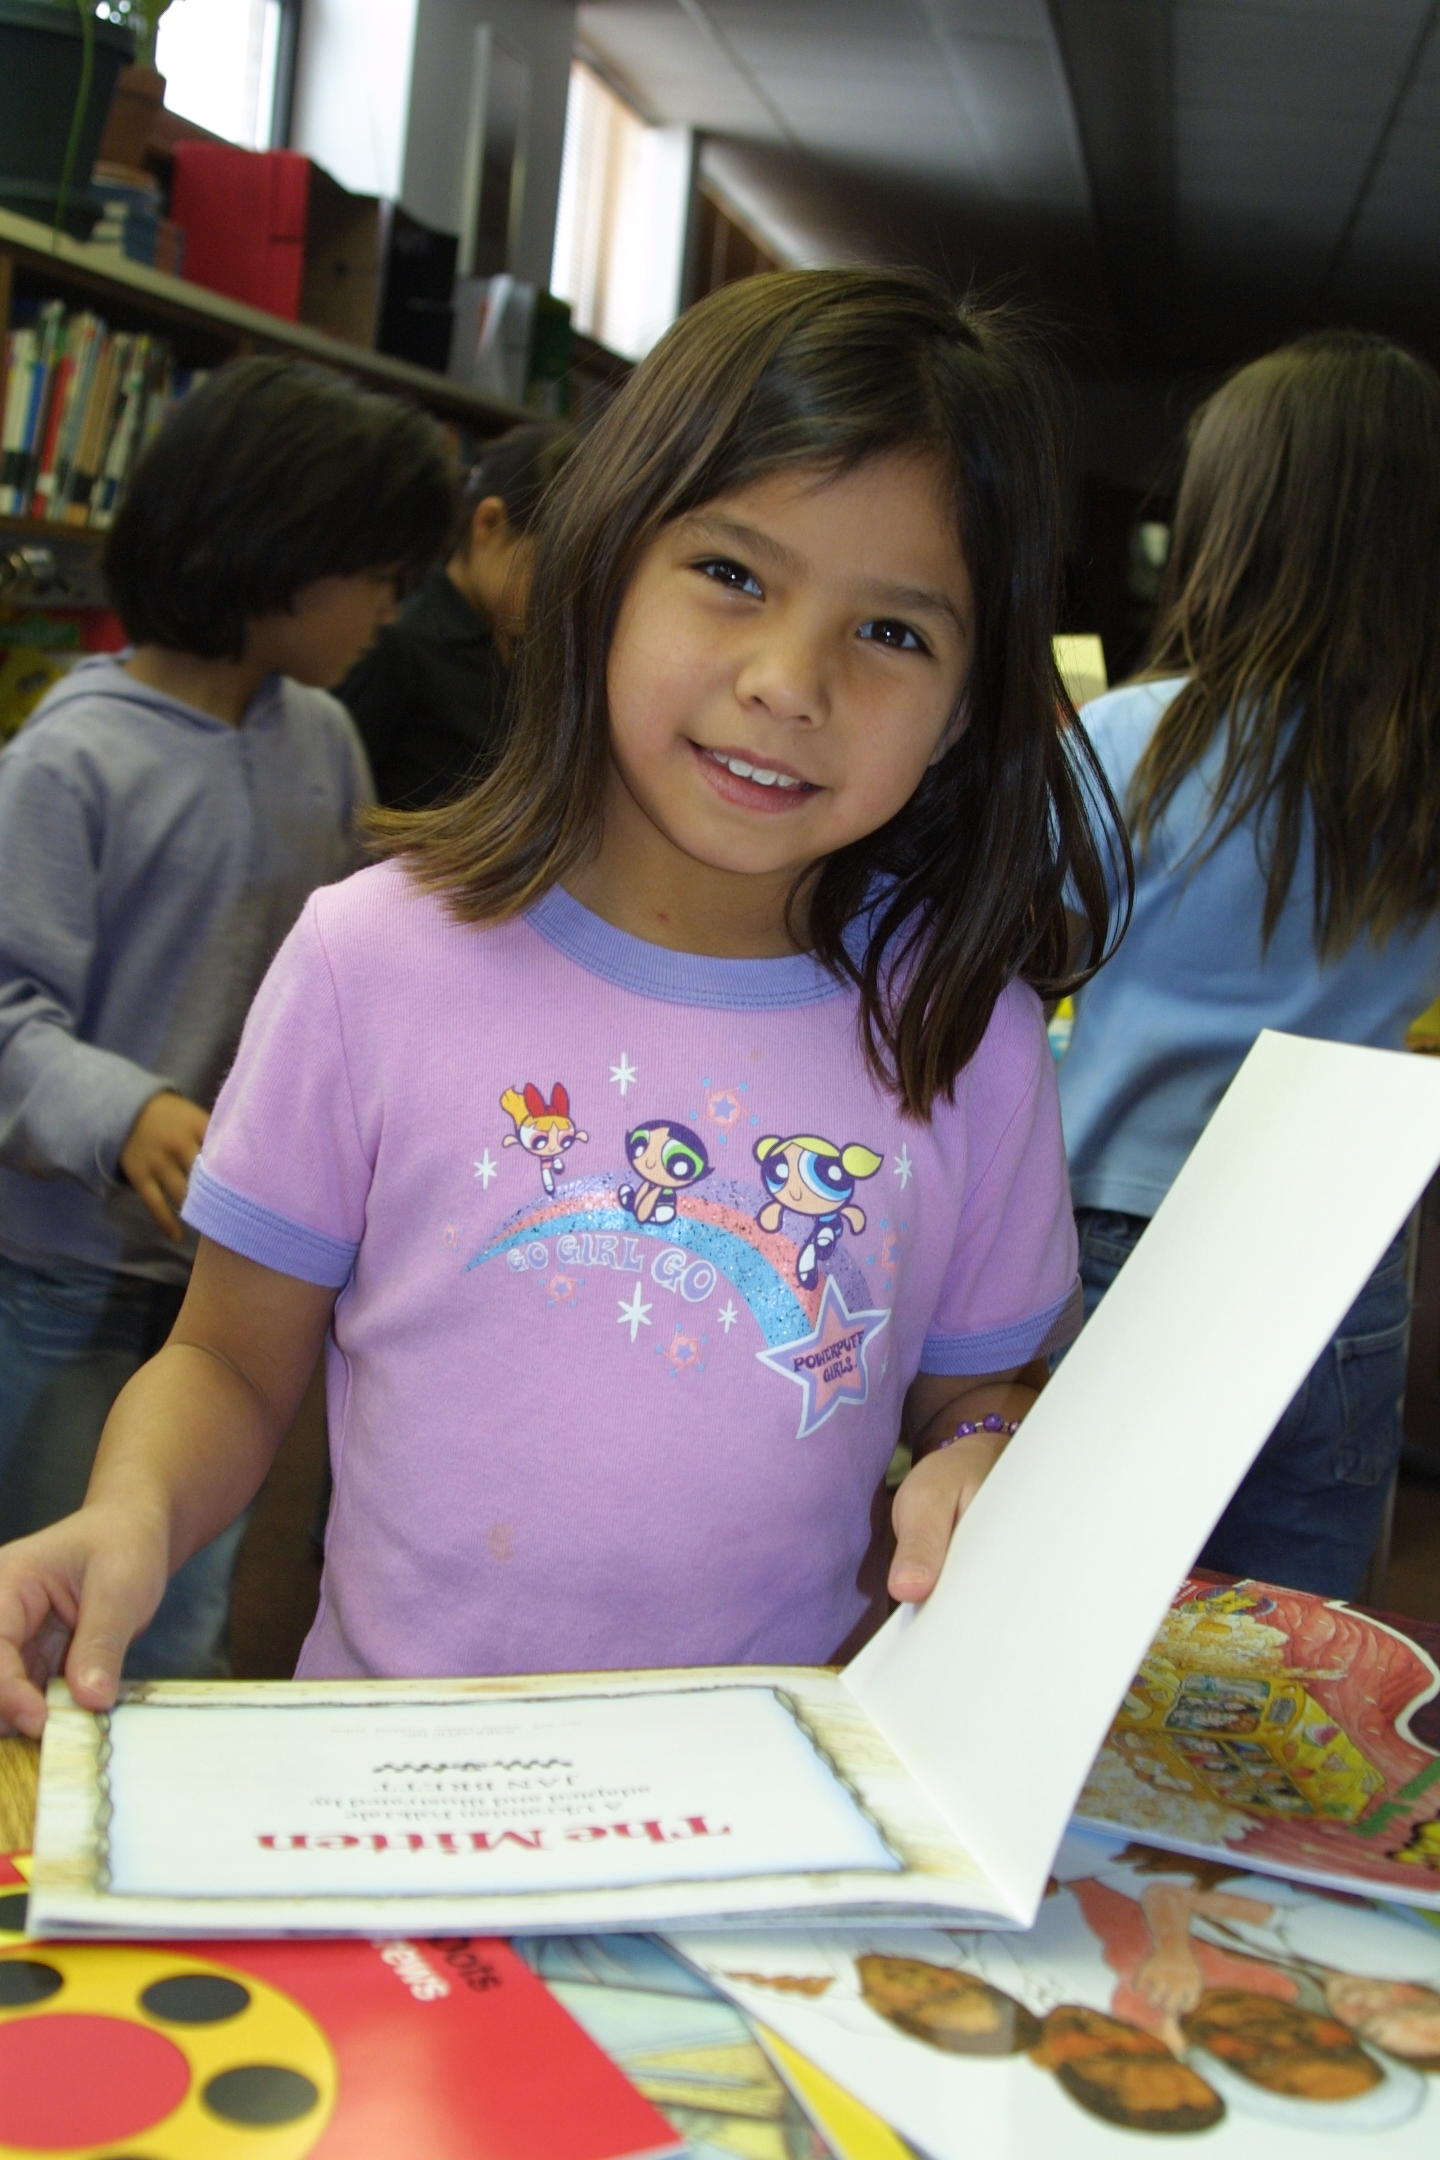 The Native American students love reading at St. Joseph's Indian School!